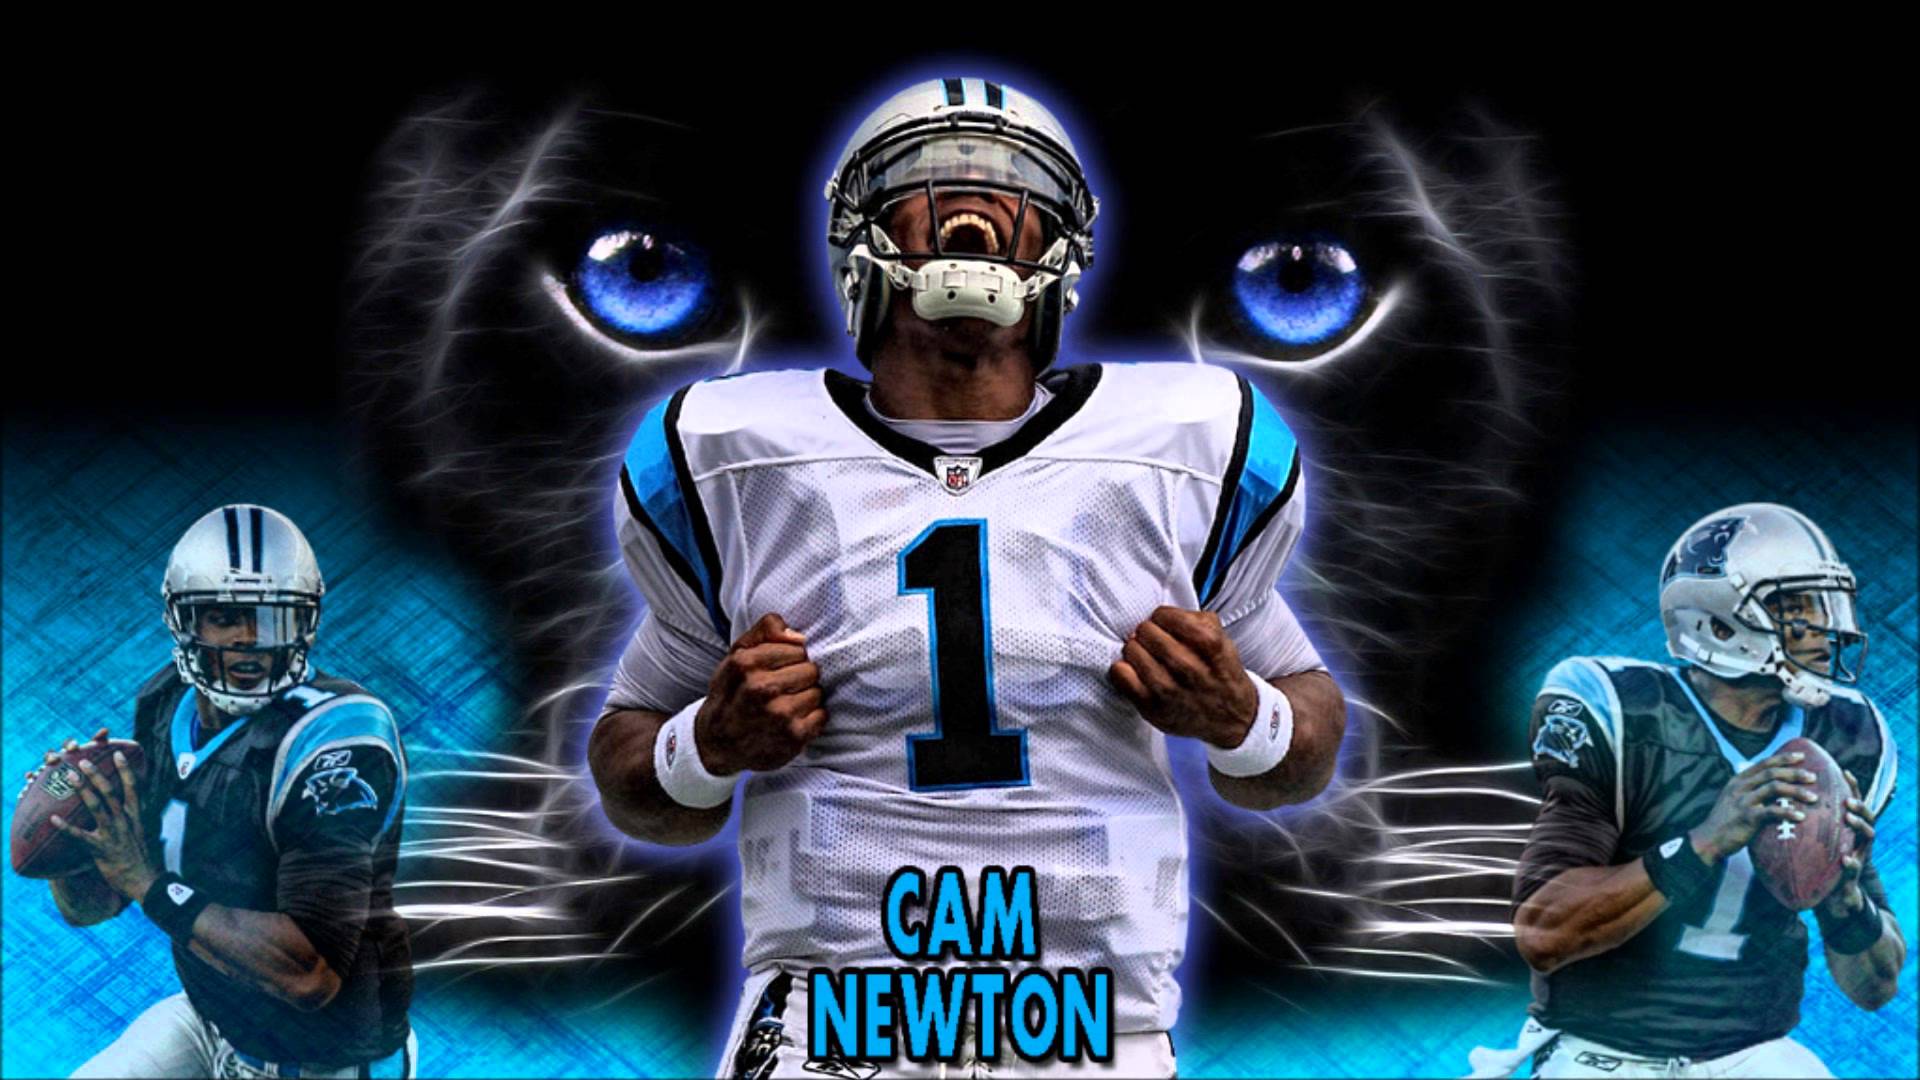 HD desktop wallpaper featuring Cam Newton in his football uniform with a dynamic background and stylized graphics.